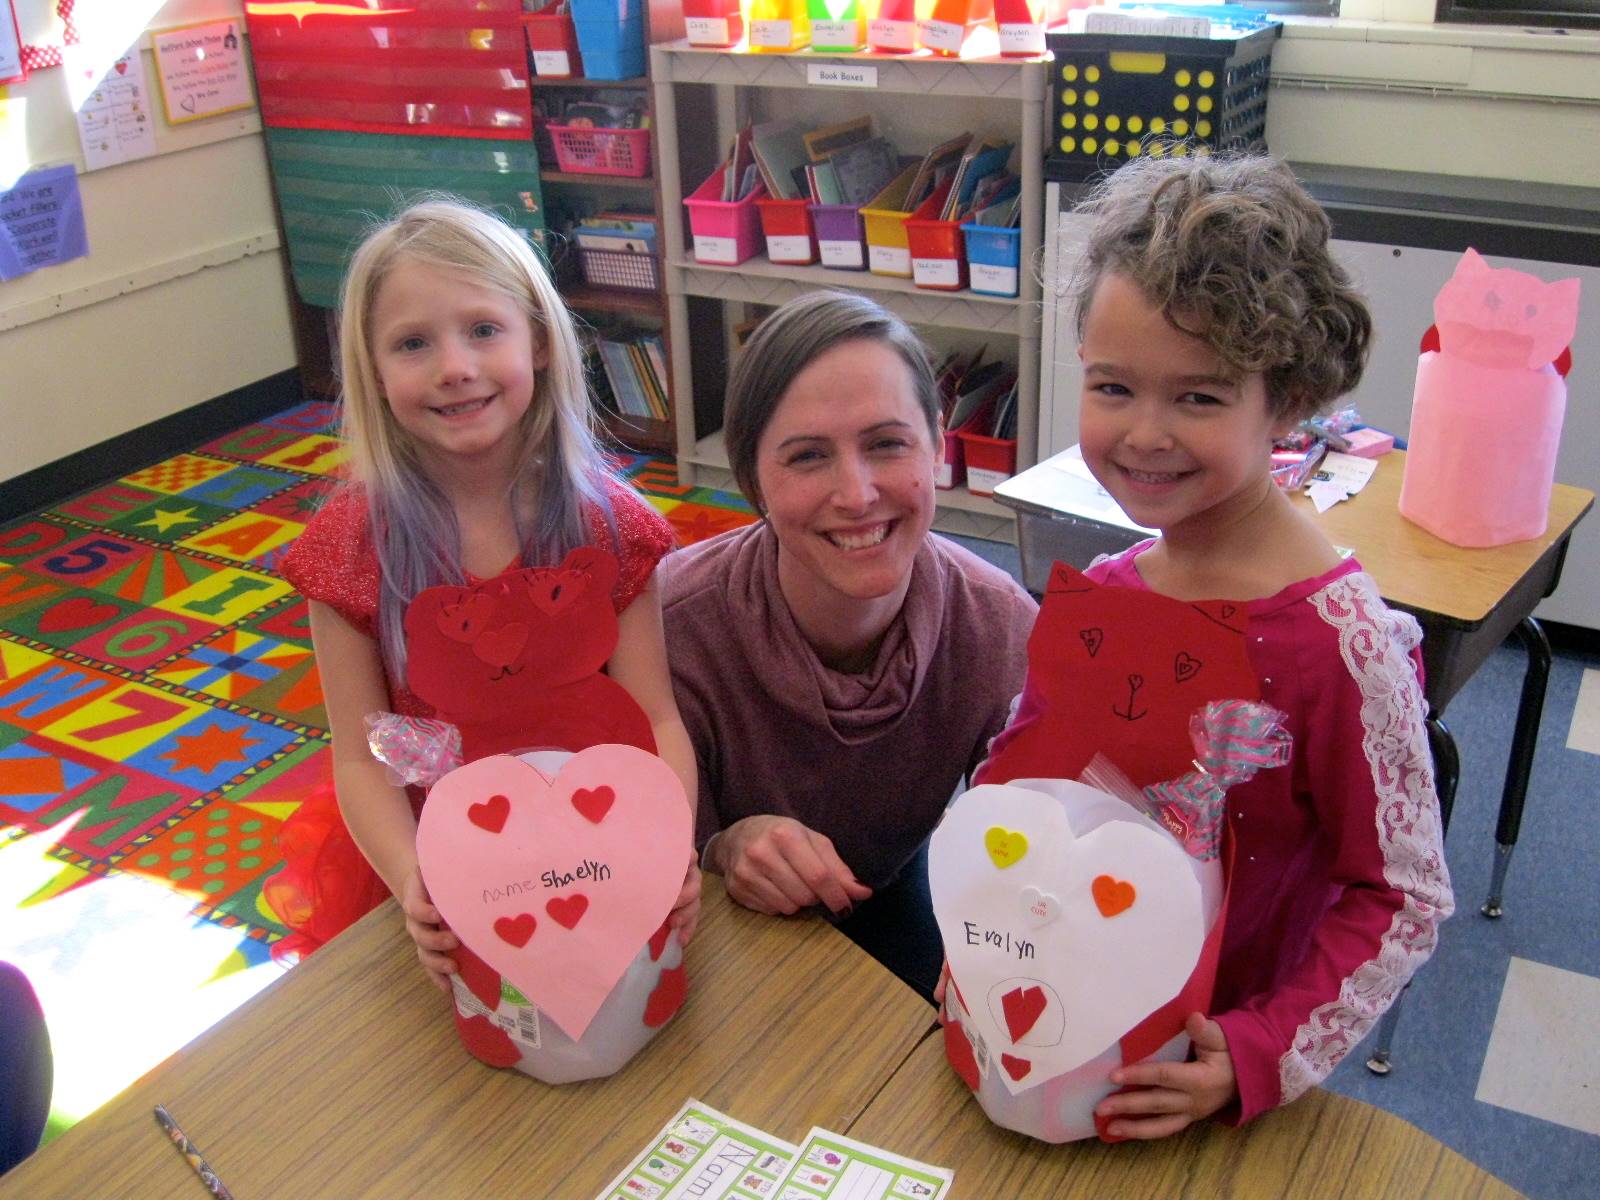 A mom and 2 students on Valentine's day.